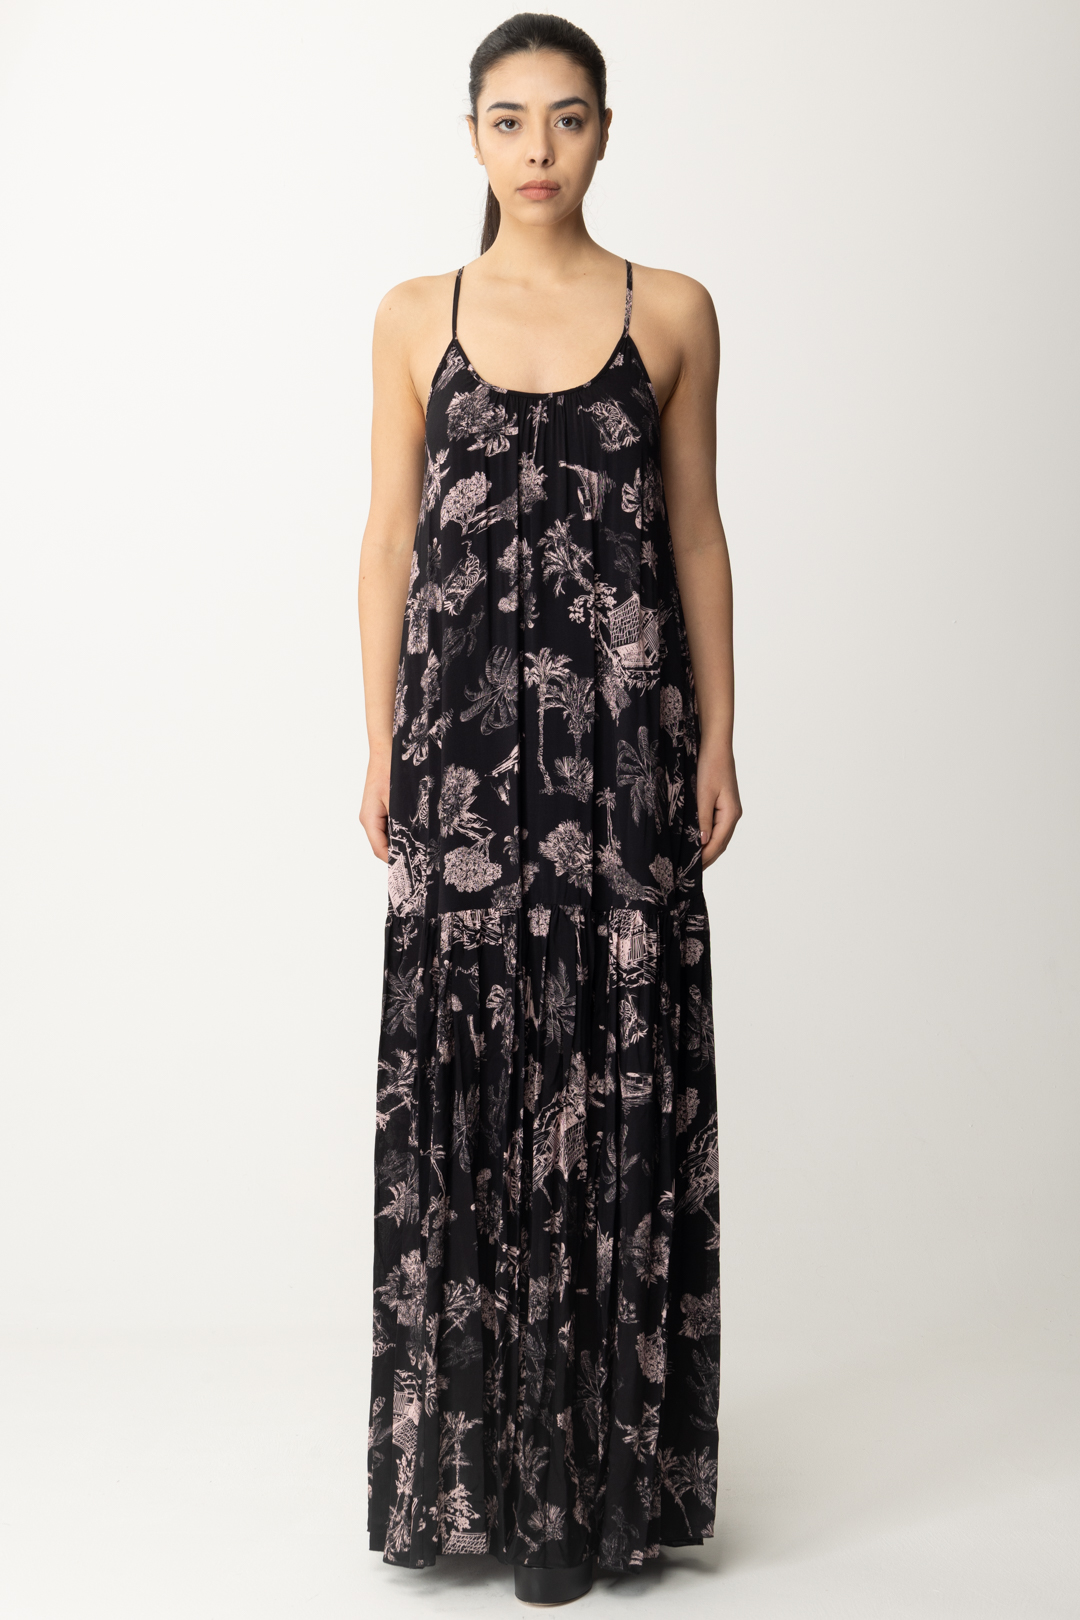 Preview: Aniye By Long Printed Tula Dress with Straps BLACK HAWAII